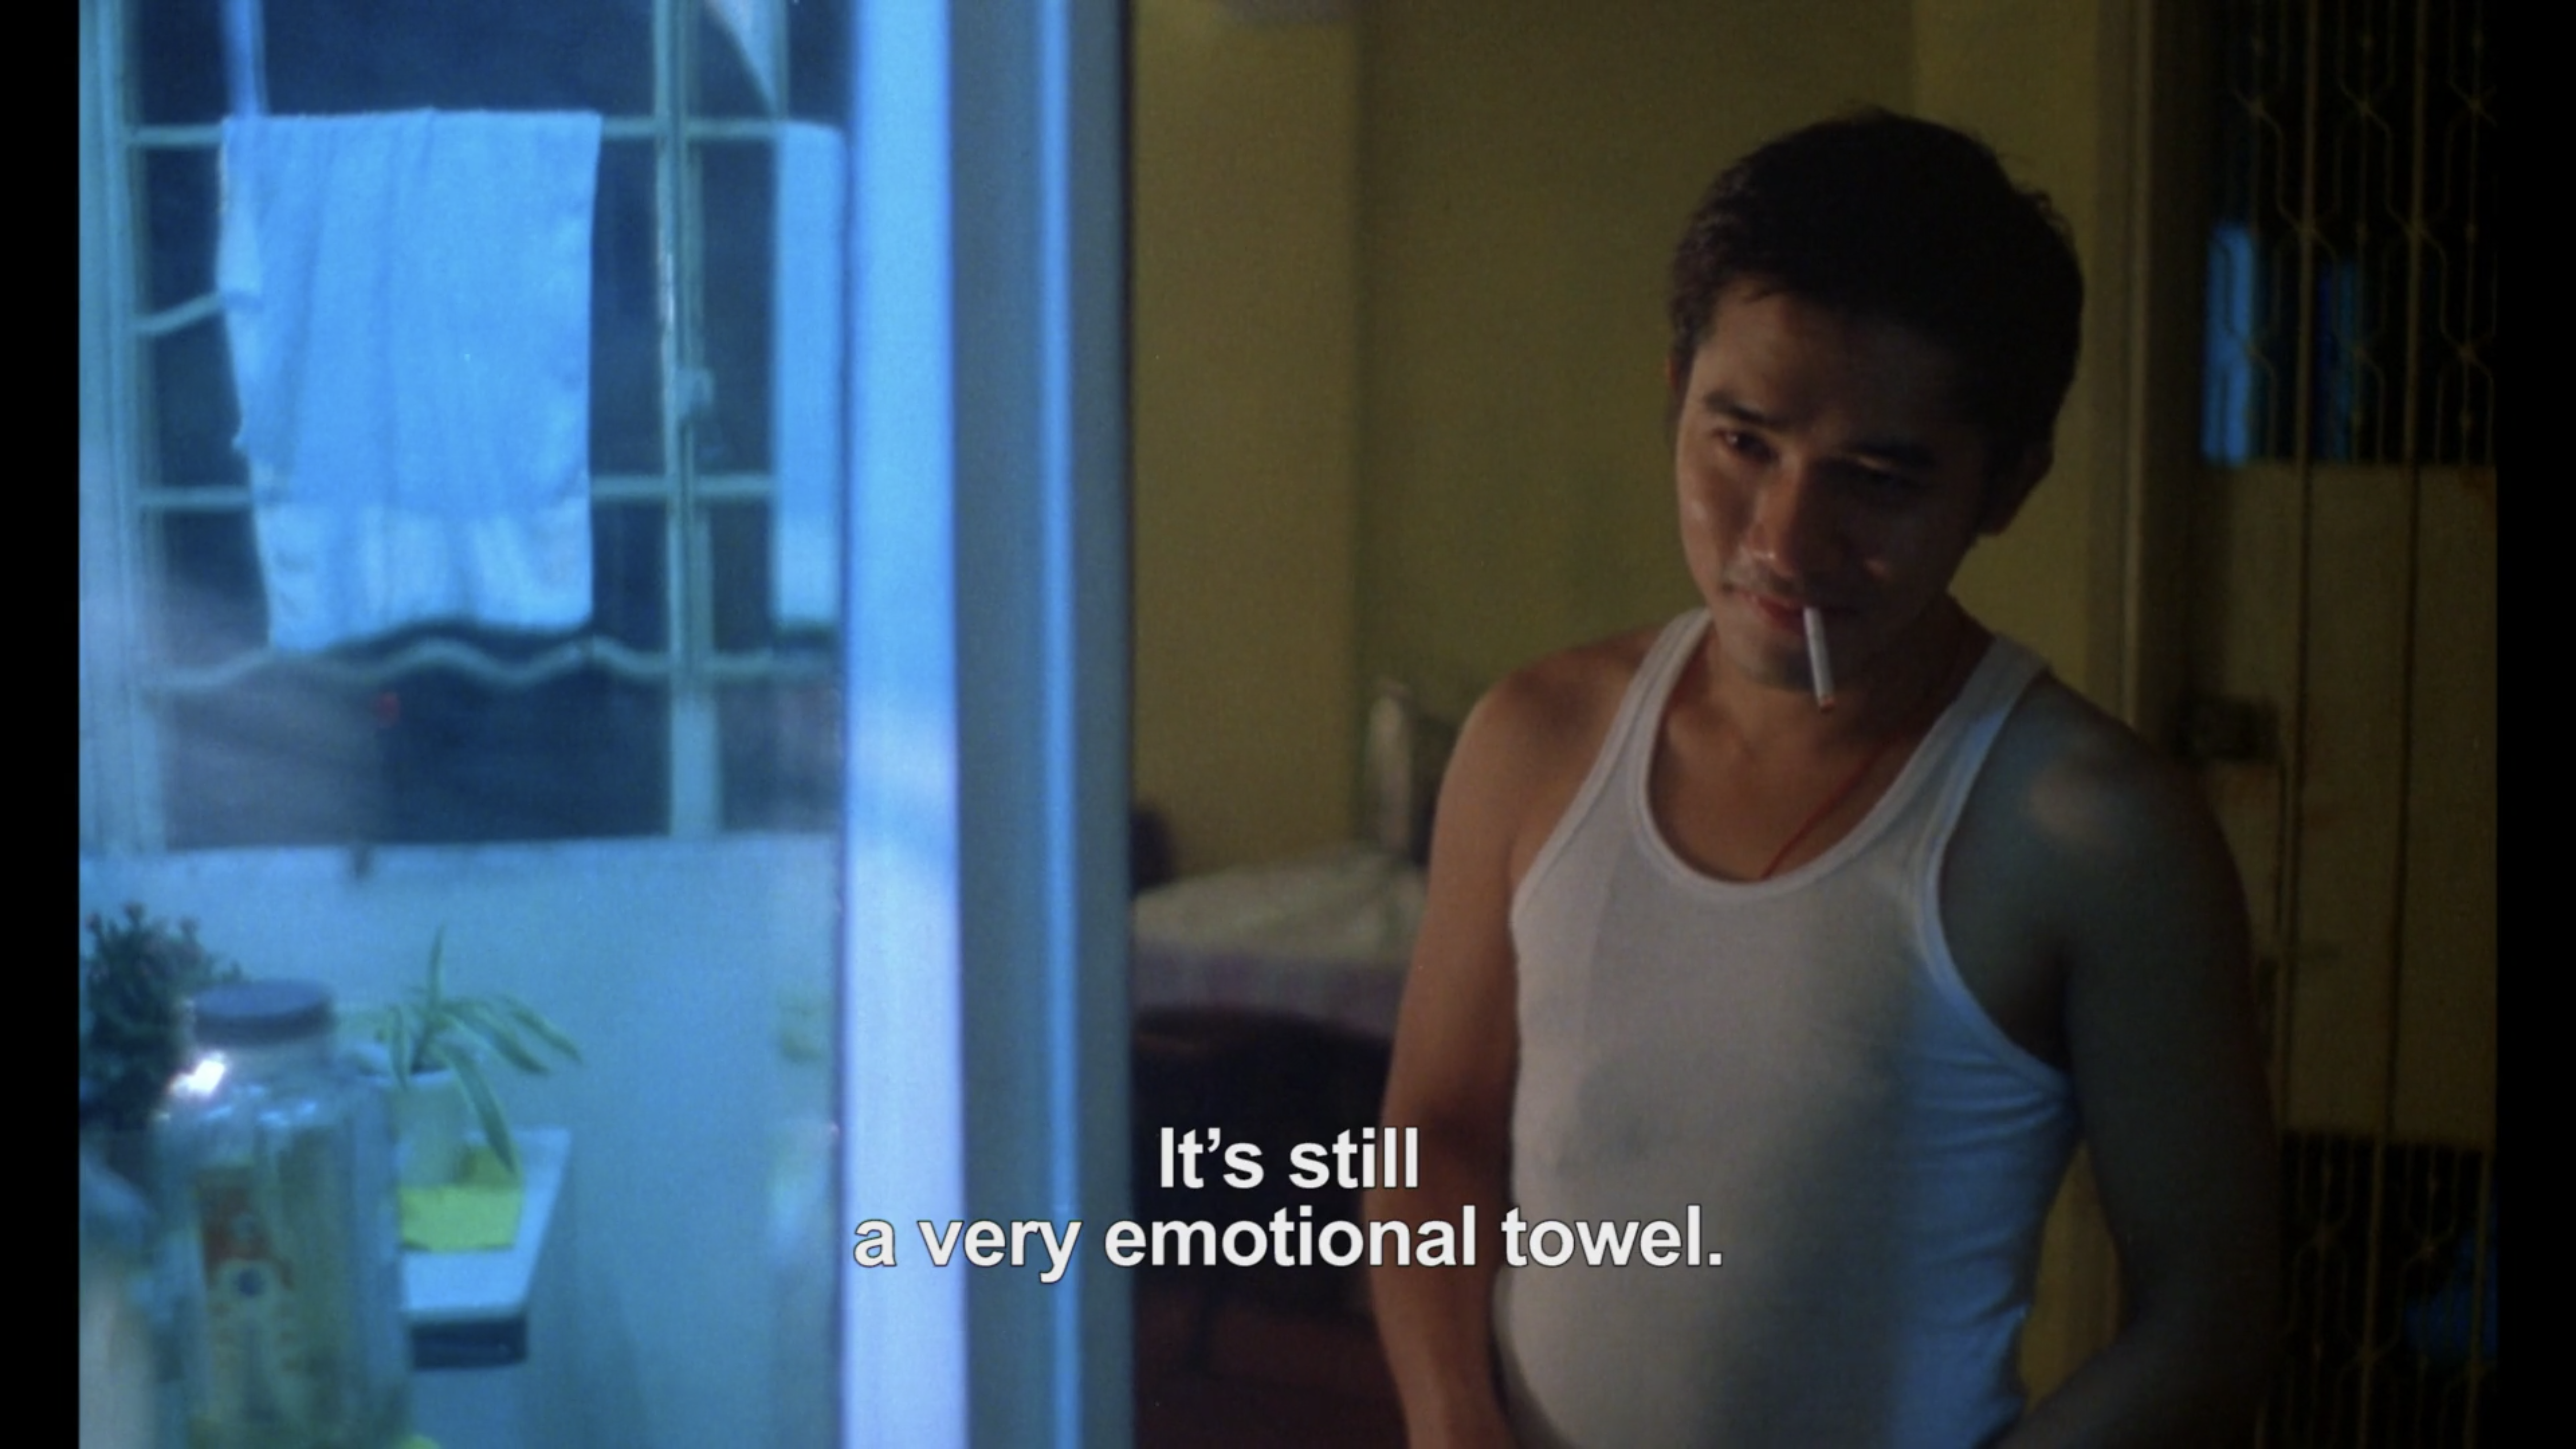 Cop 663 reflects on his towel crying in Chungking Express